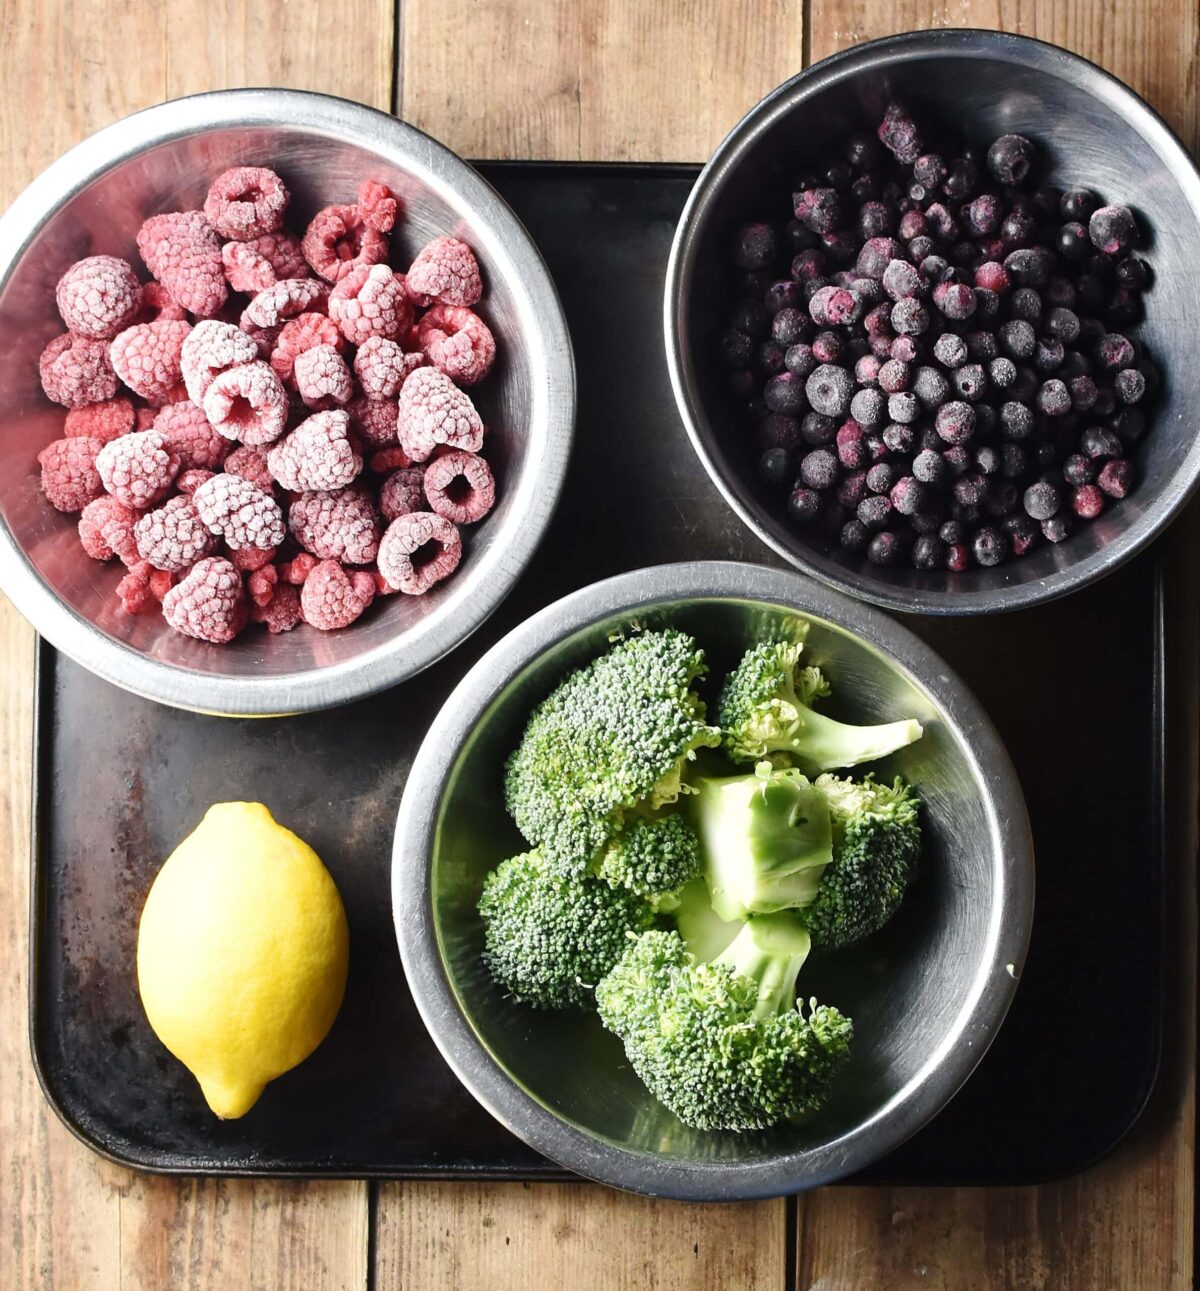 Frozen blueberries, raspberries and chopped broccoli in individual metal bowls and lemon on top of black tray.